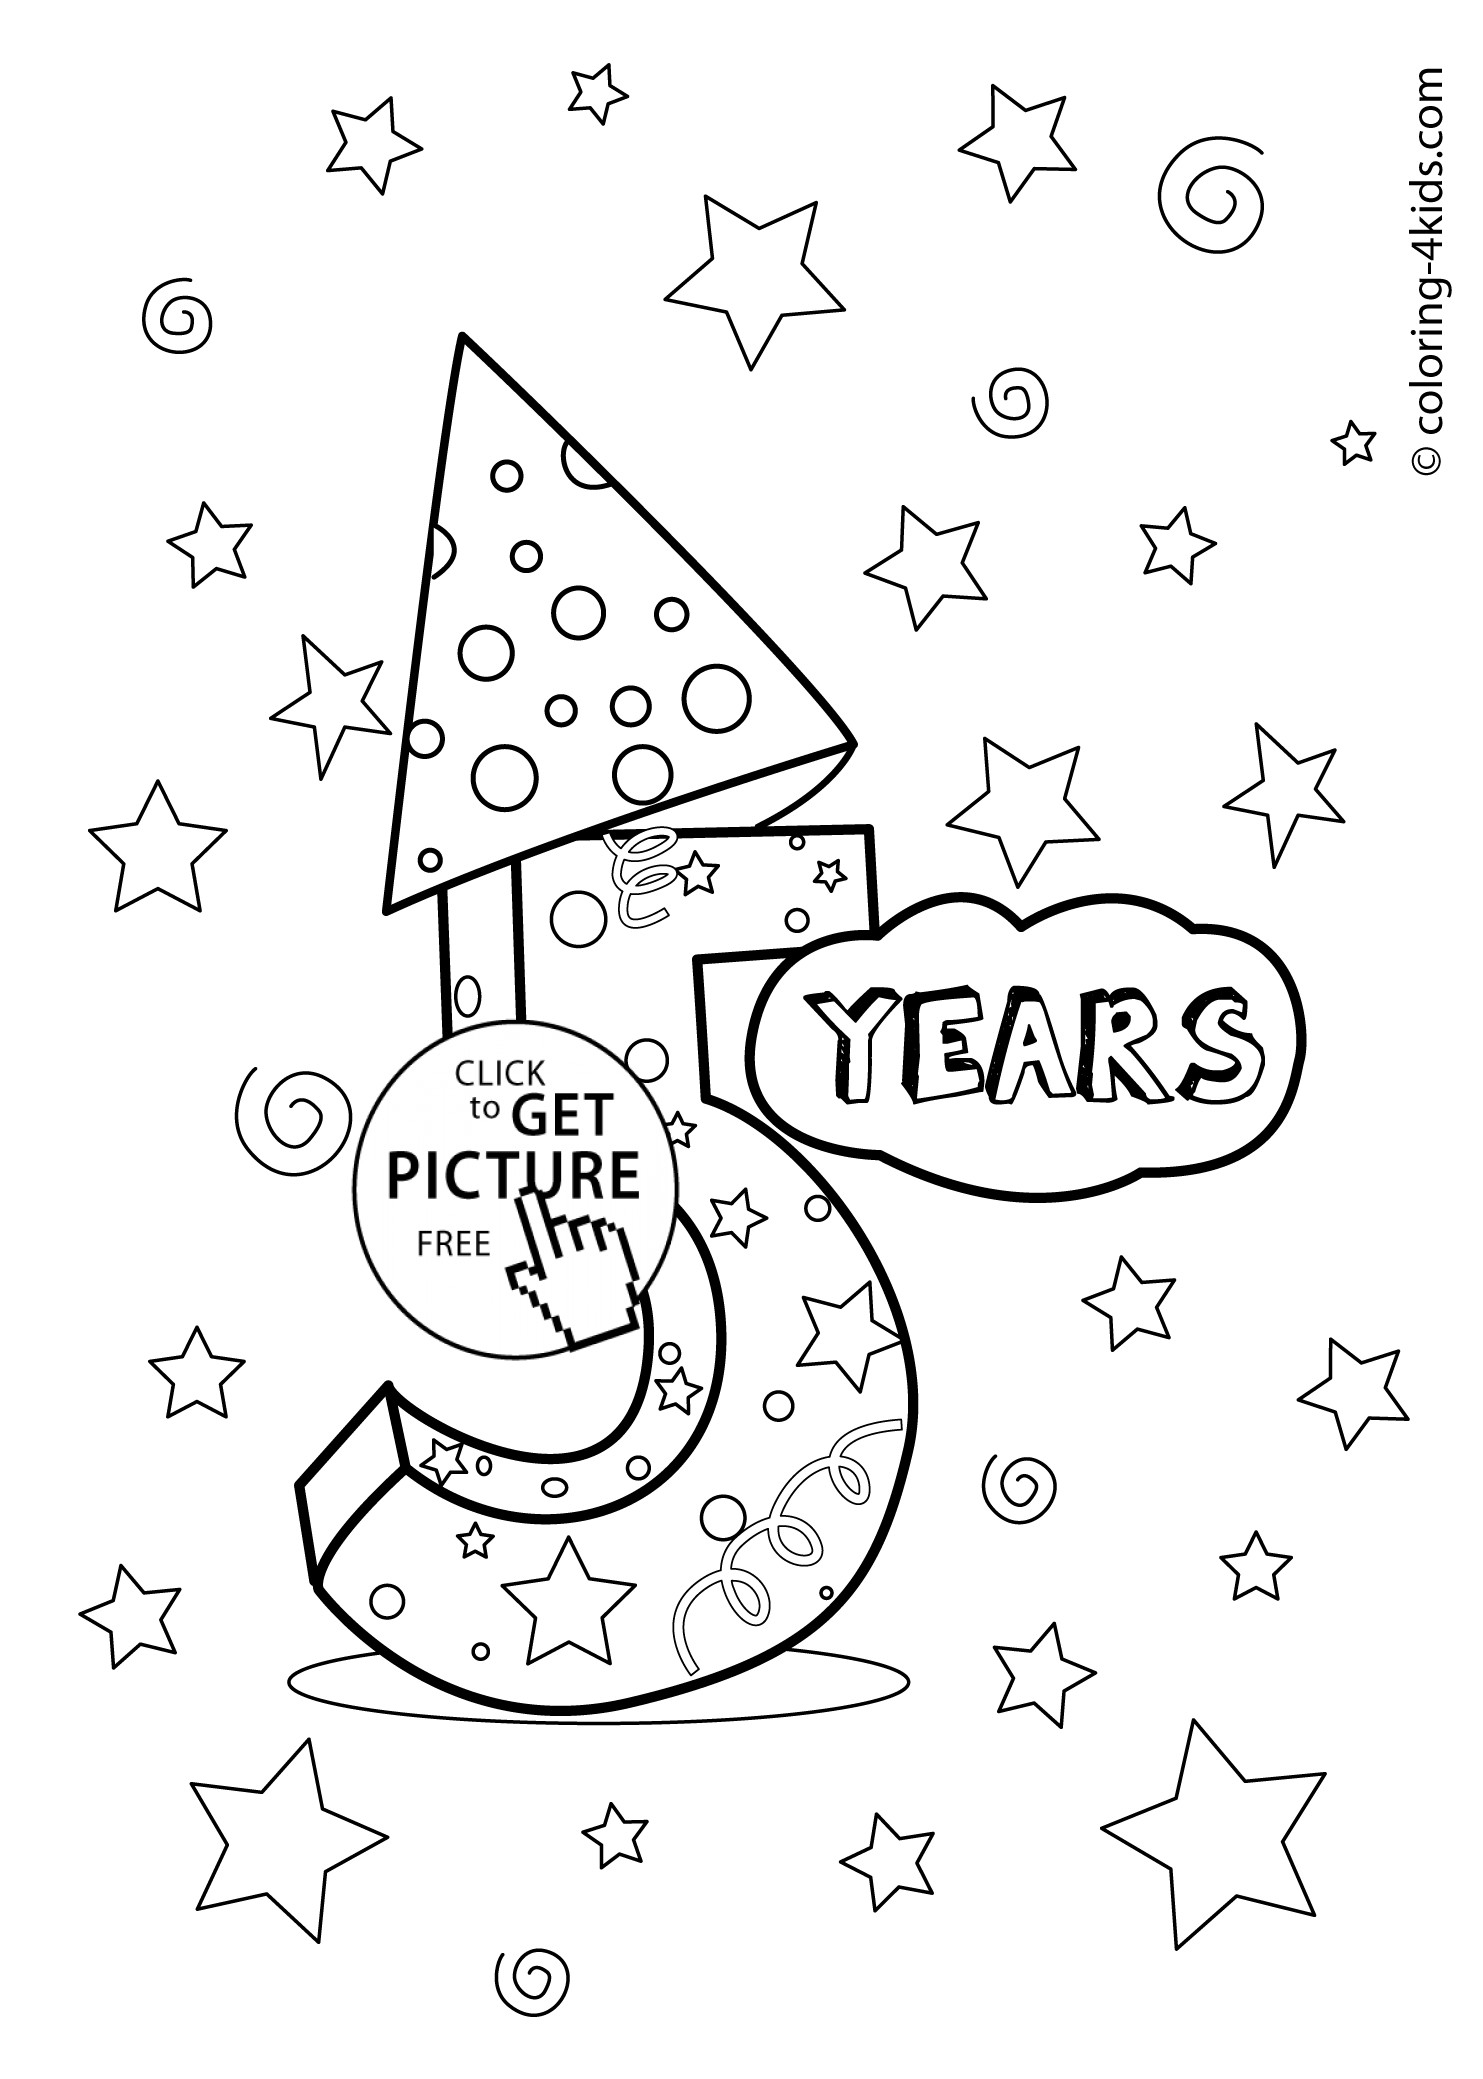 Coloring Sheets For Boys Age 5
 5 years birthday coloring pages for kids printables